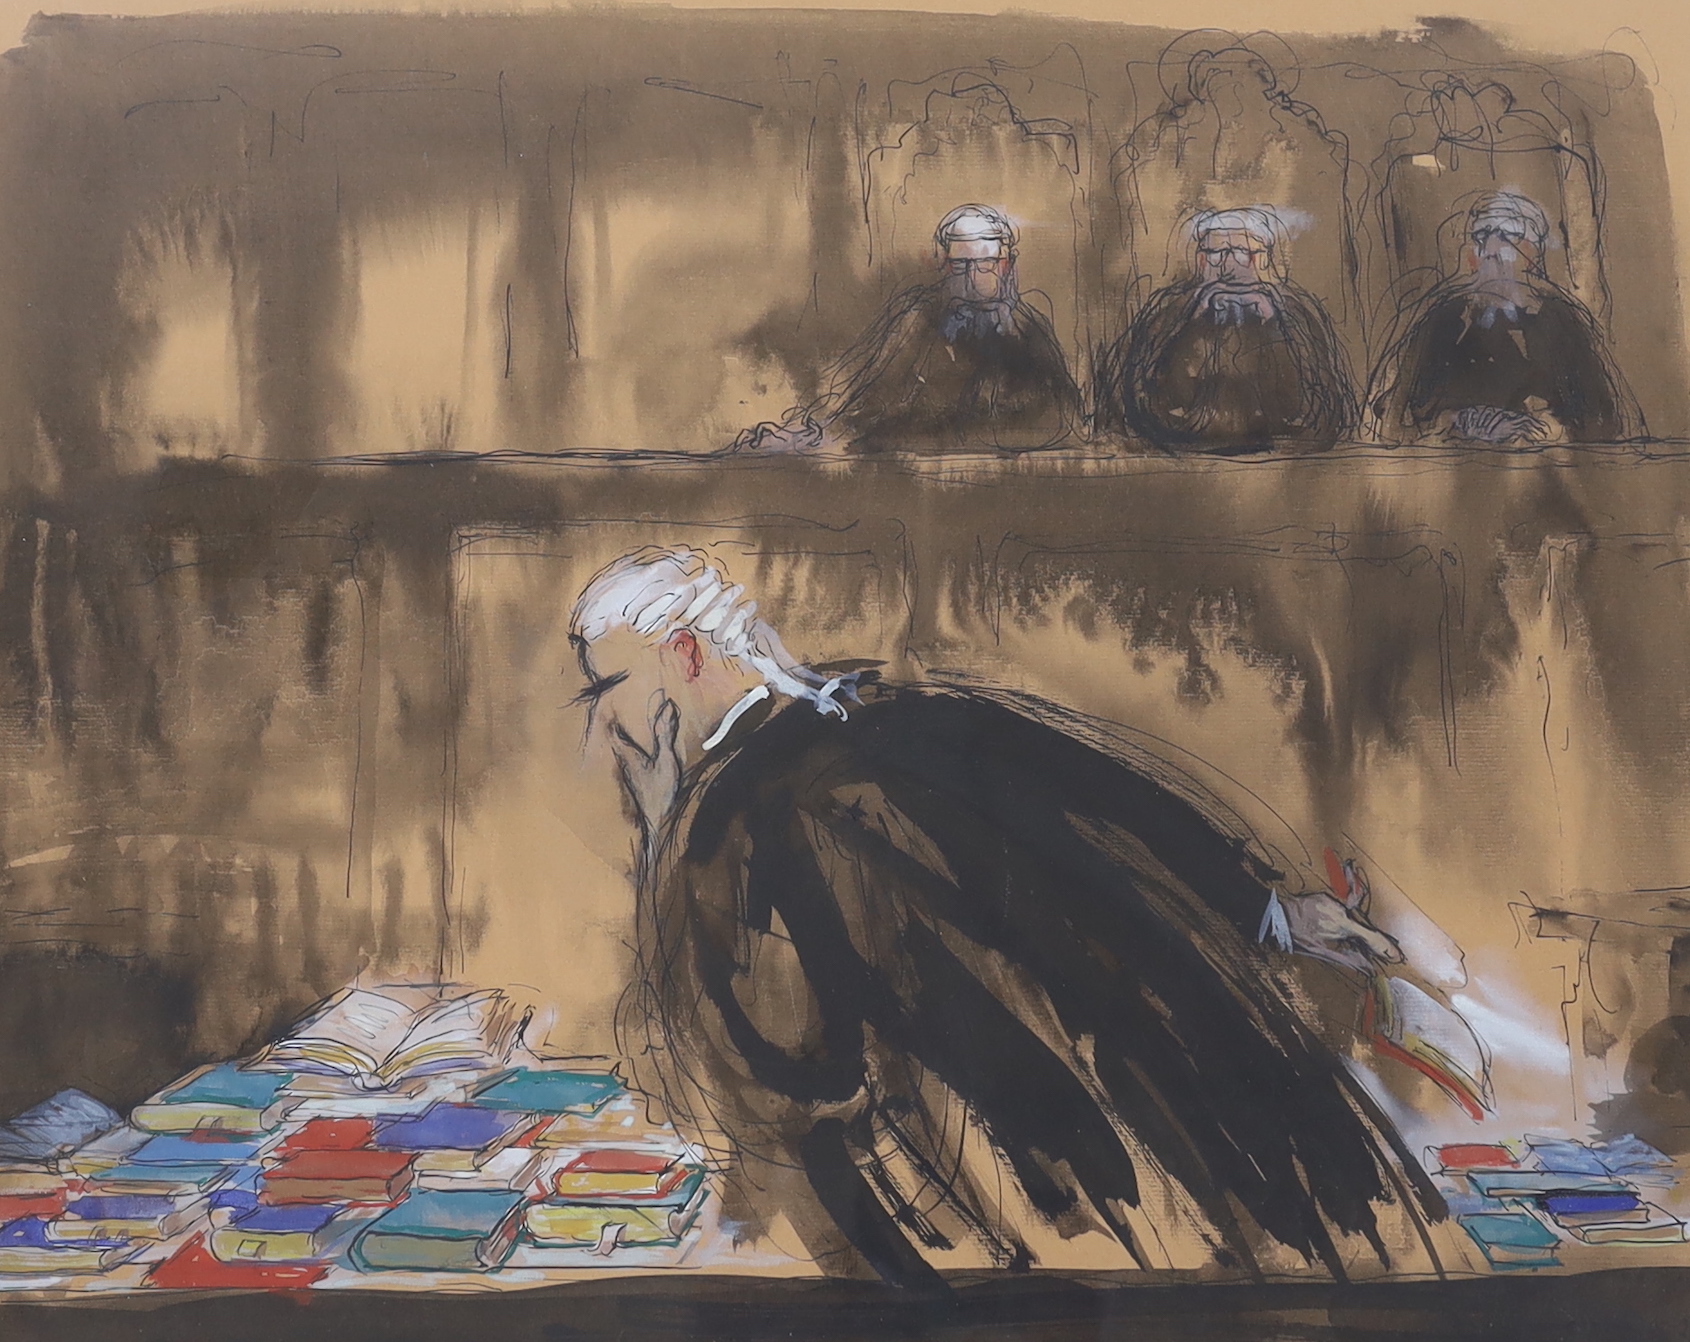 Phyllis Mackenzie (1911-1998), pen, wash and watercolour, ‘Late Instruction’ and ‘Court of Appeal’, labels verso with Marjorie Parr, 285 Kings Road, Chelsea, London label, each 46 x 59cm (2)